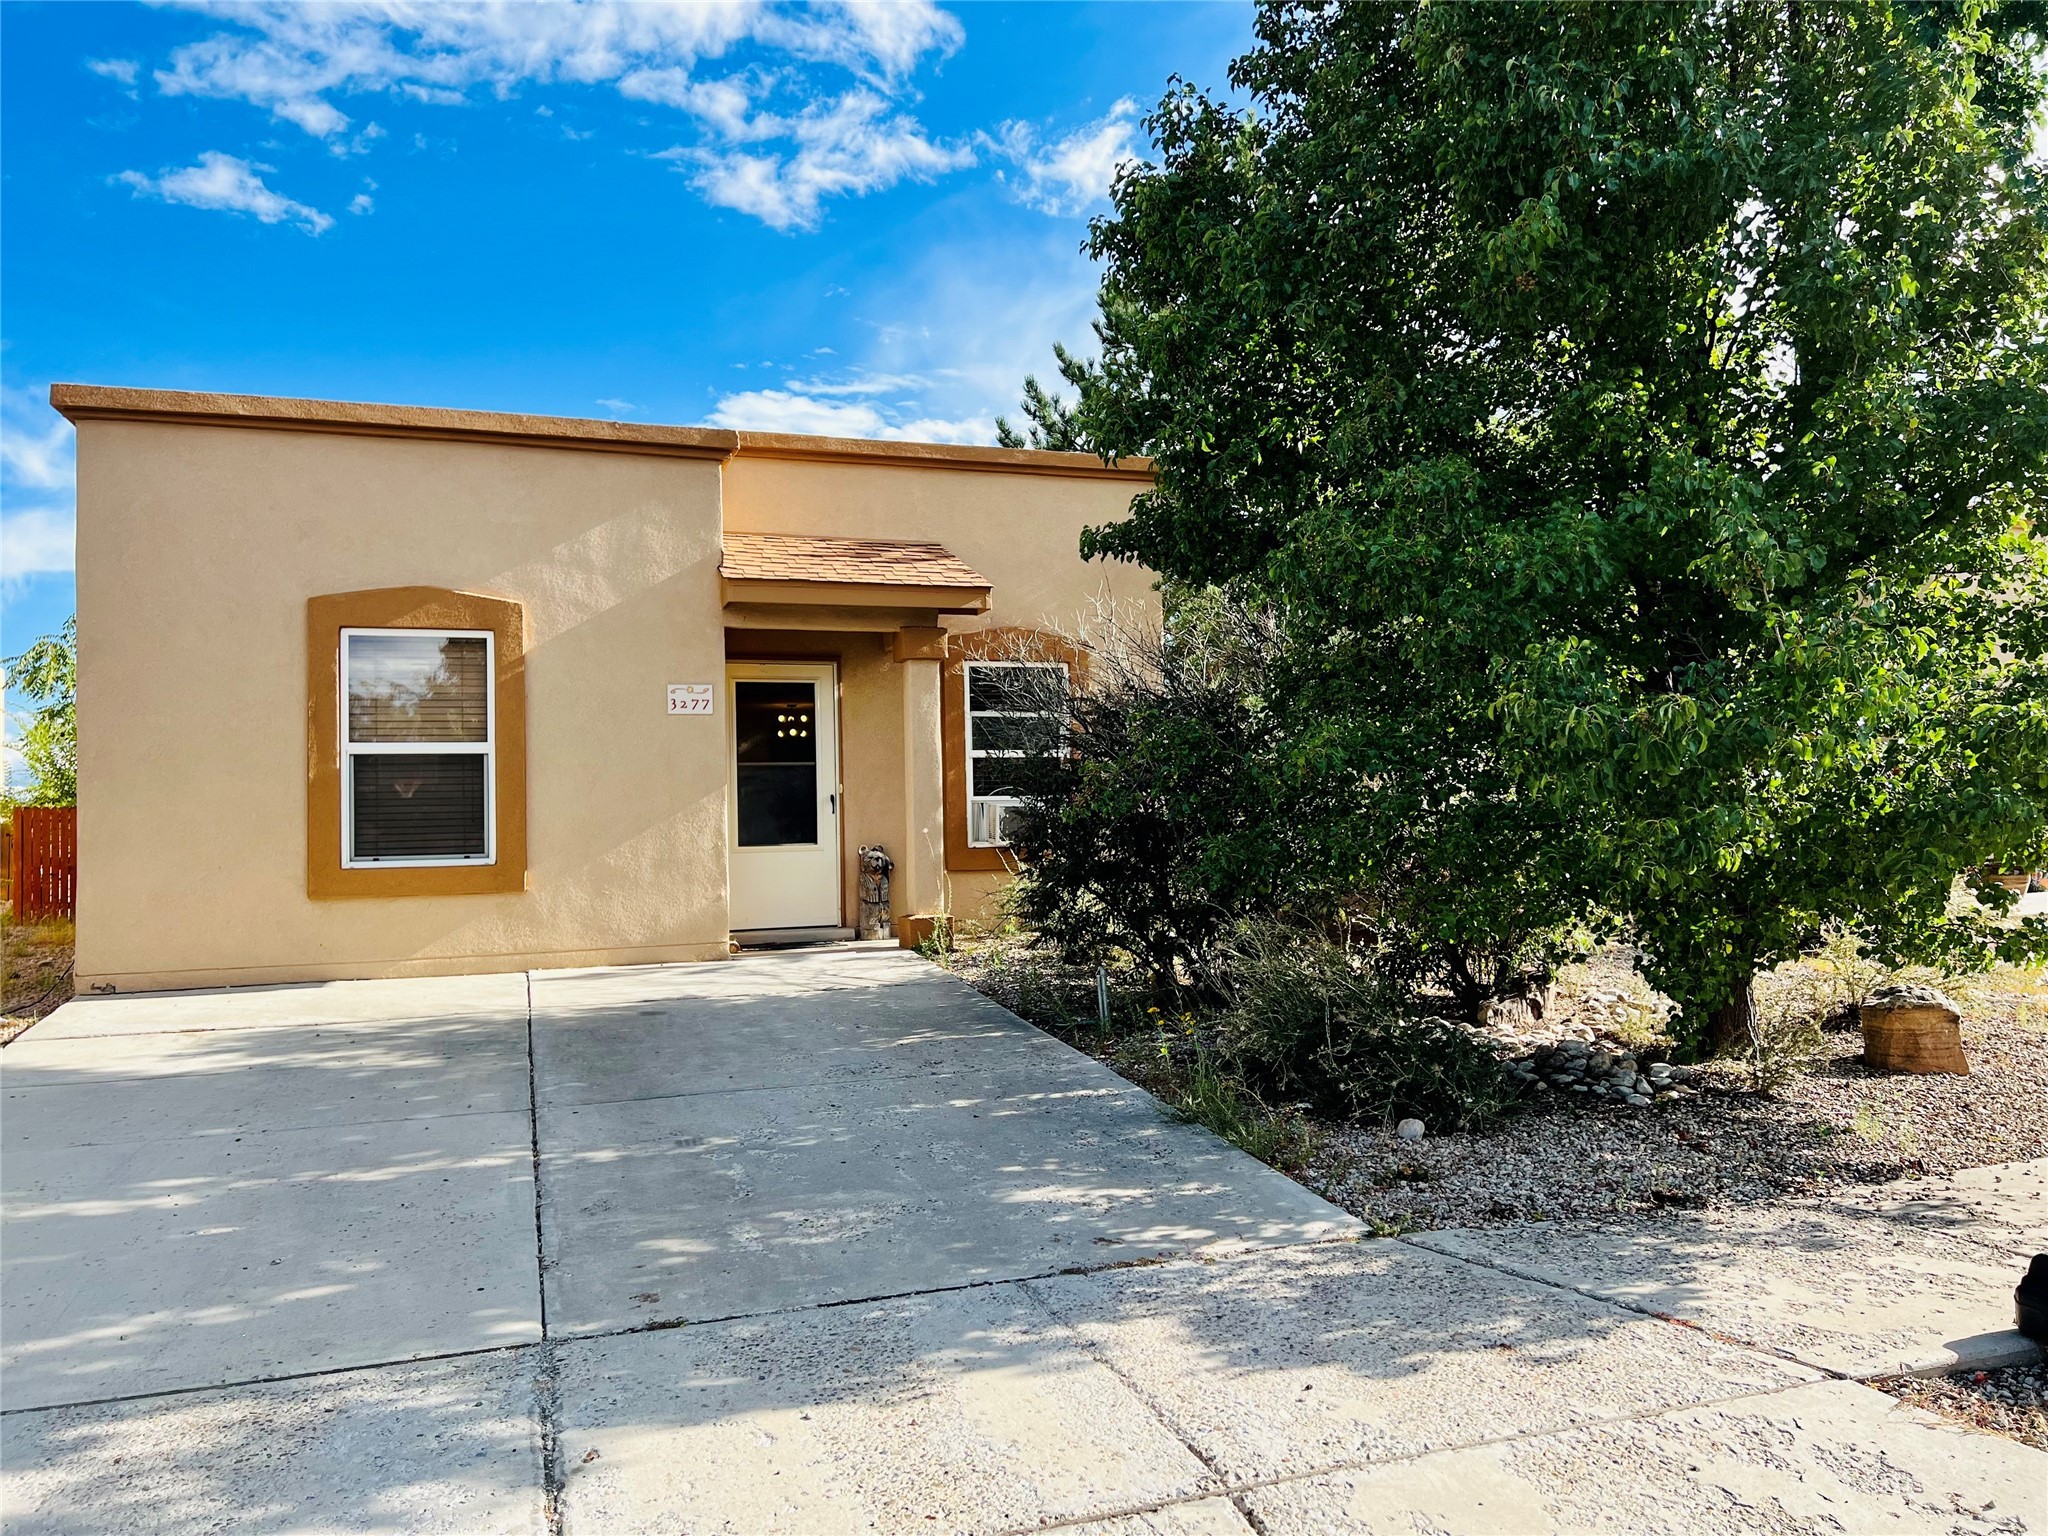 3277 Primo Colores, Santa Fe, New Mexico 87507, 2 Bedrooms Bedrooms, ,1 BathroomBathrooms,Residential,For Sale,3277 Primo Colores,202233104